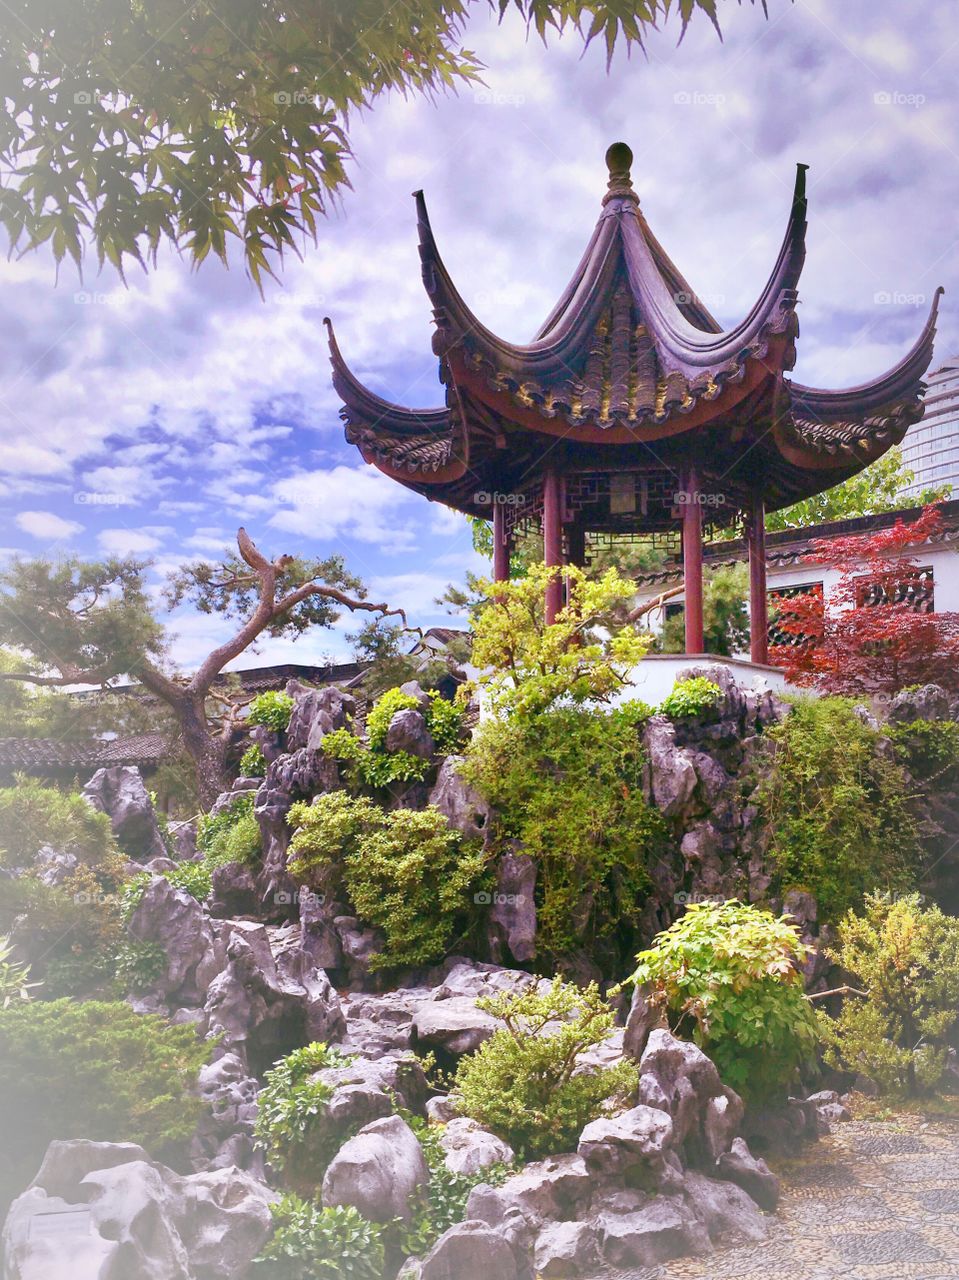 The beautifully designed Sun Yat-Sen Classical Chinese Garden in Vancouver B.C. Lush green gardens in a peaceful setting invite the visitor to pause and reflect. A little oasis in a large city.